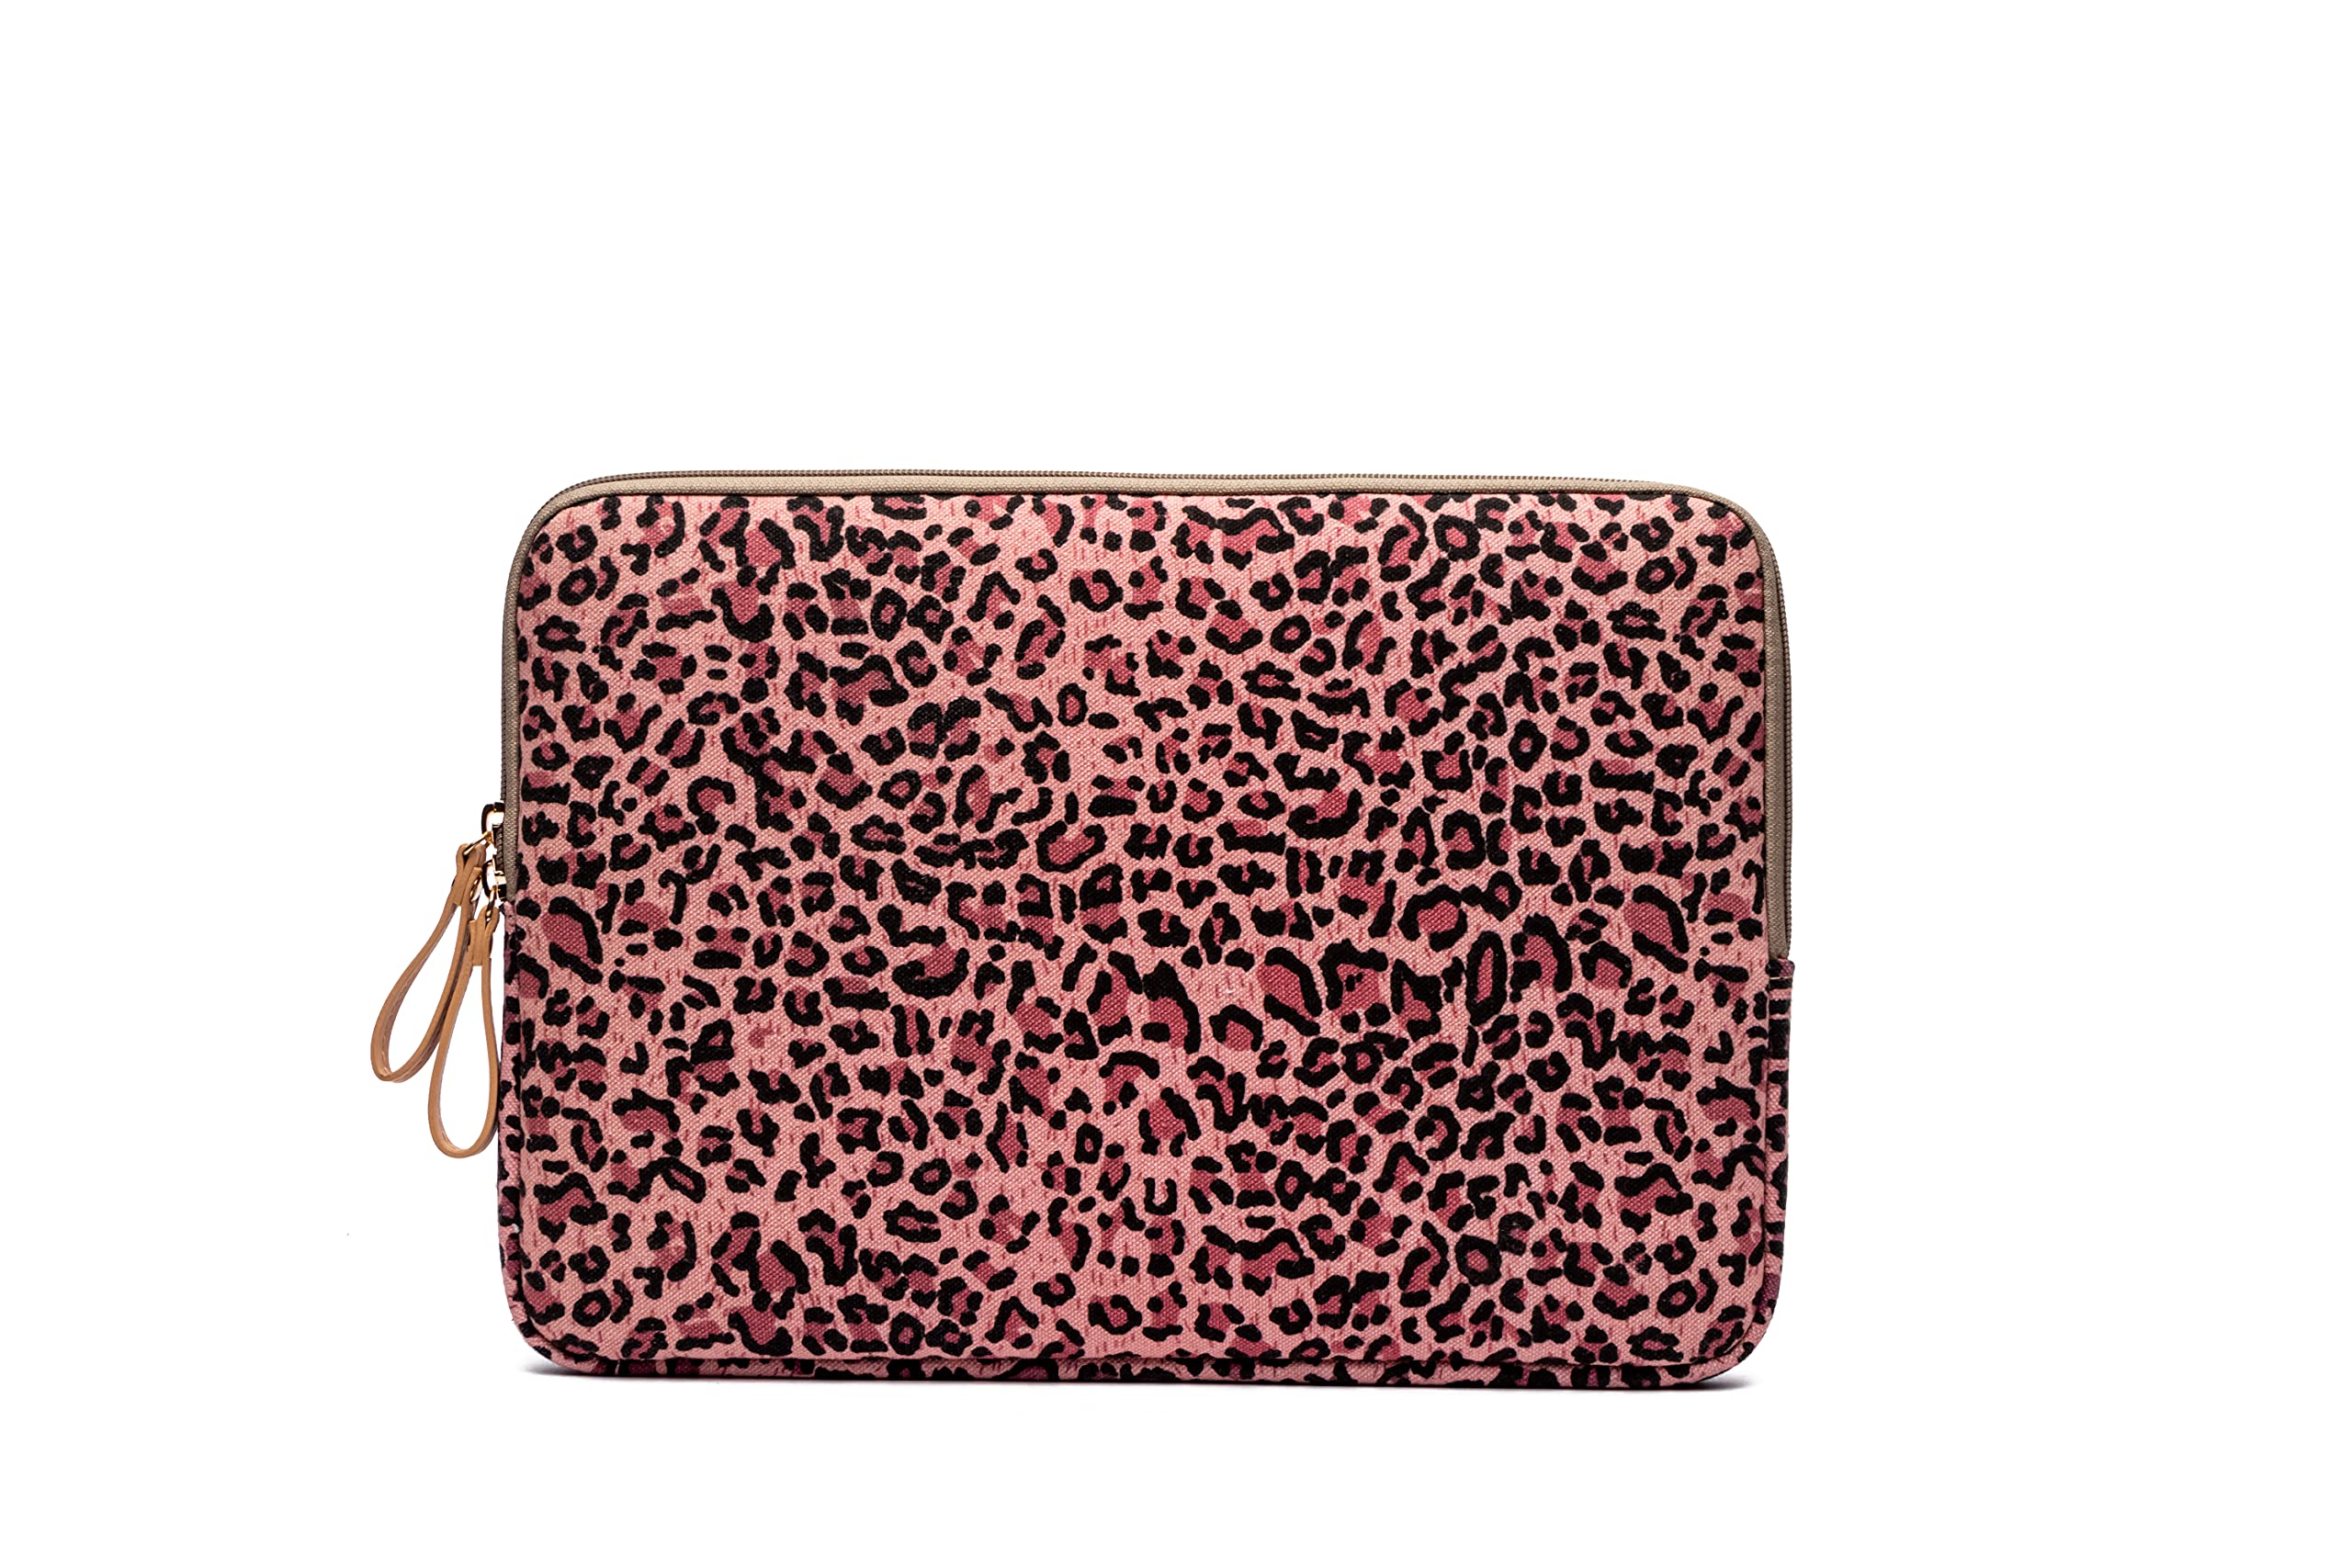 XSKN Leopard Spot Canvas Fabric Zipper Laptop Sleeve Case Cover for All 13 14 15 inch Computers, Bag MacBook Air Pro Retina Laptops Notebook (13 inch, for 13.3 Laptop), Pink